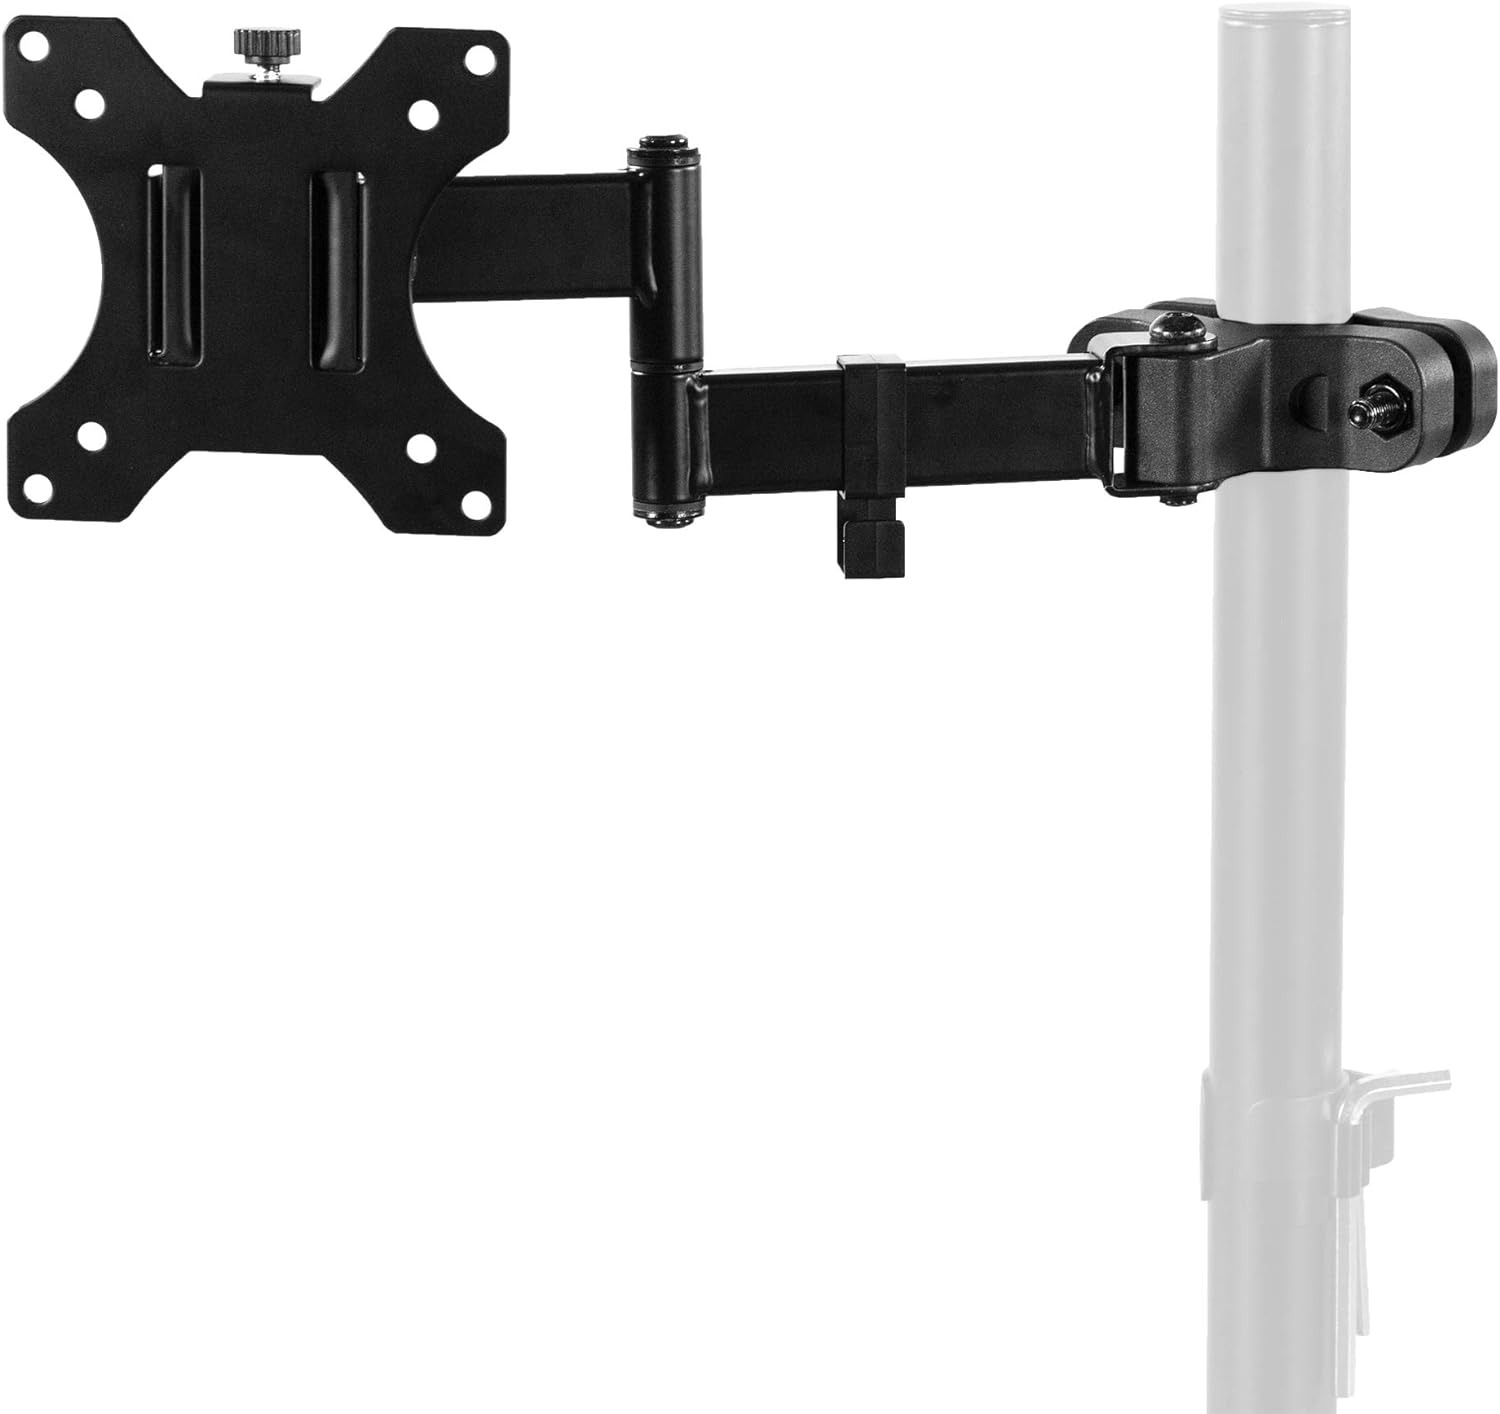 VIVO Steel Universal Full Motion Pole Mount Monitor Arm with Removable 75mm and